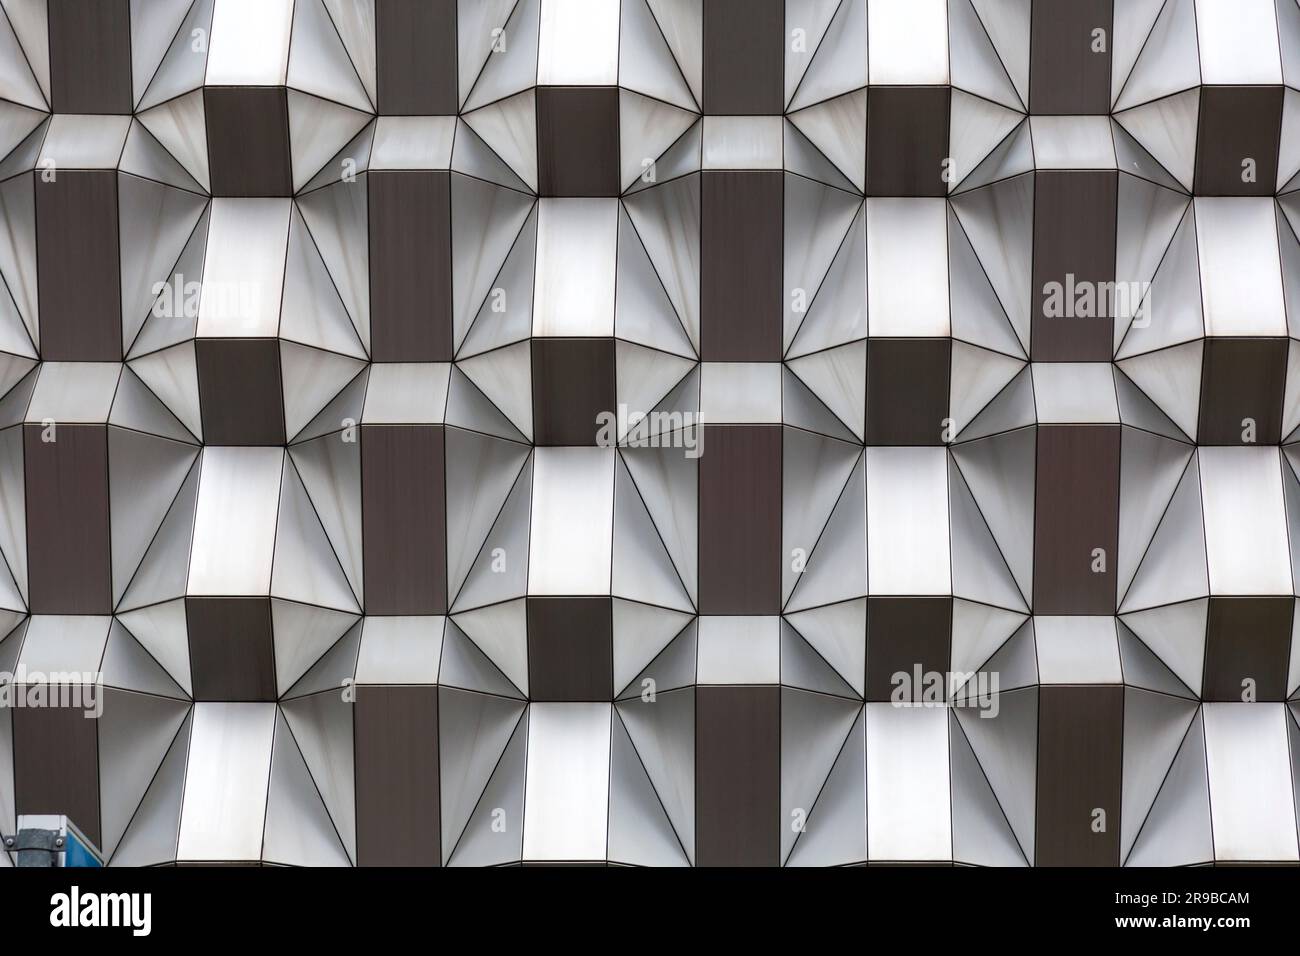 Architectural detail surface texture background with polygonal pattern ...